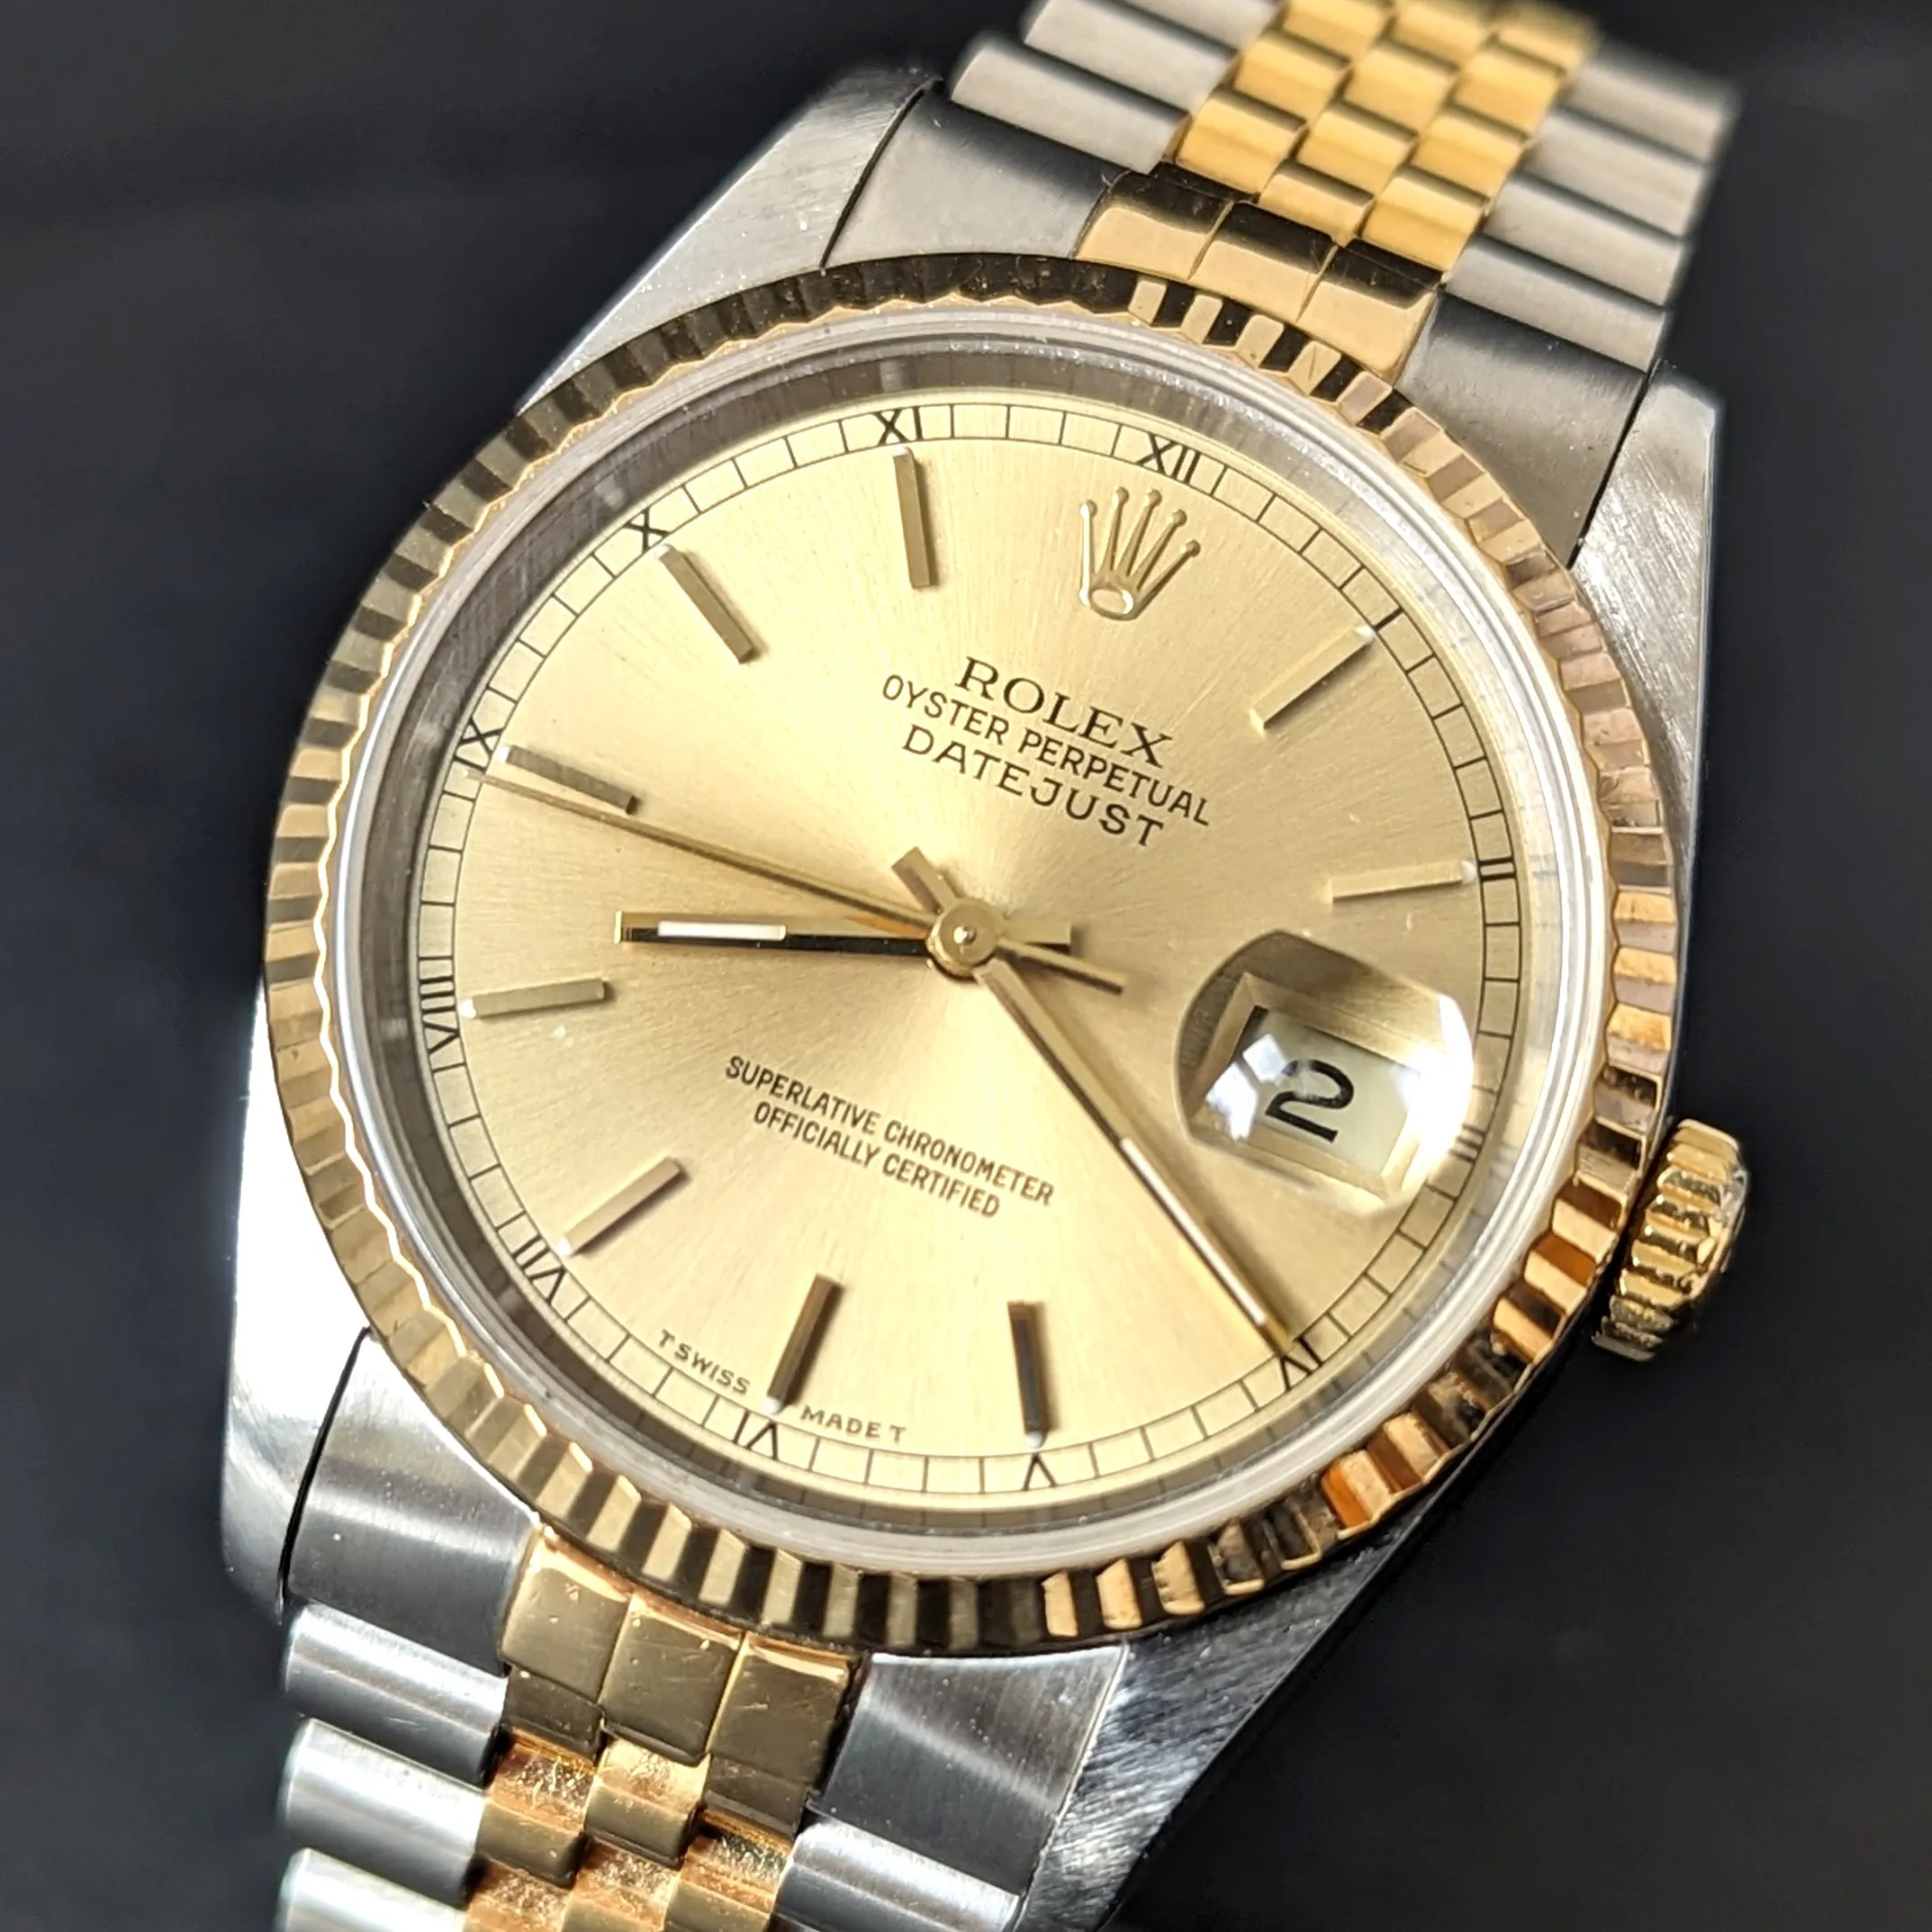 Exceptional value gents Rolex front